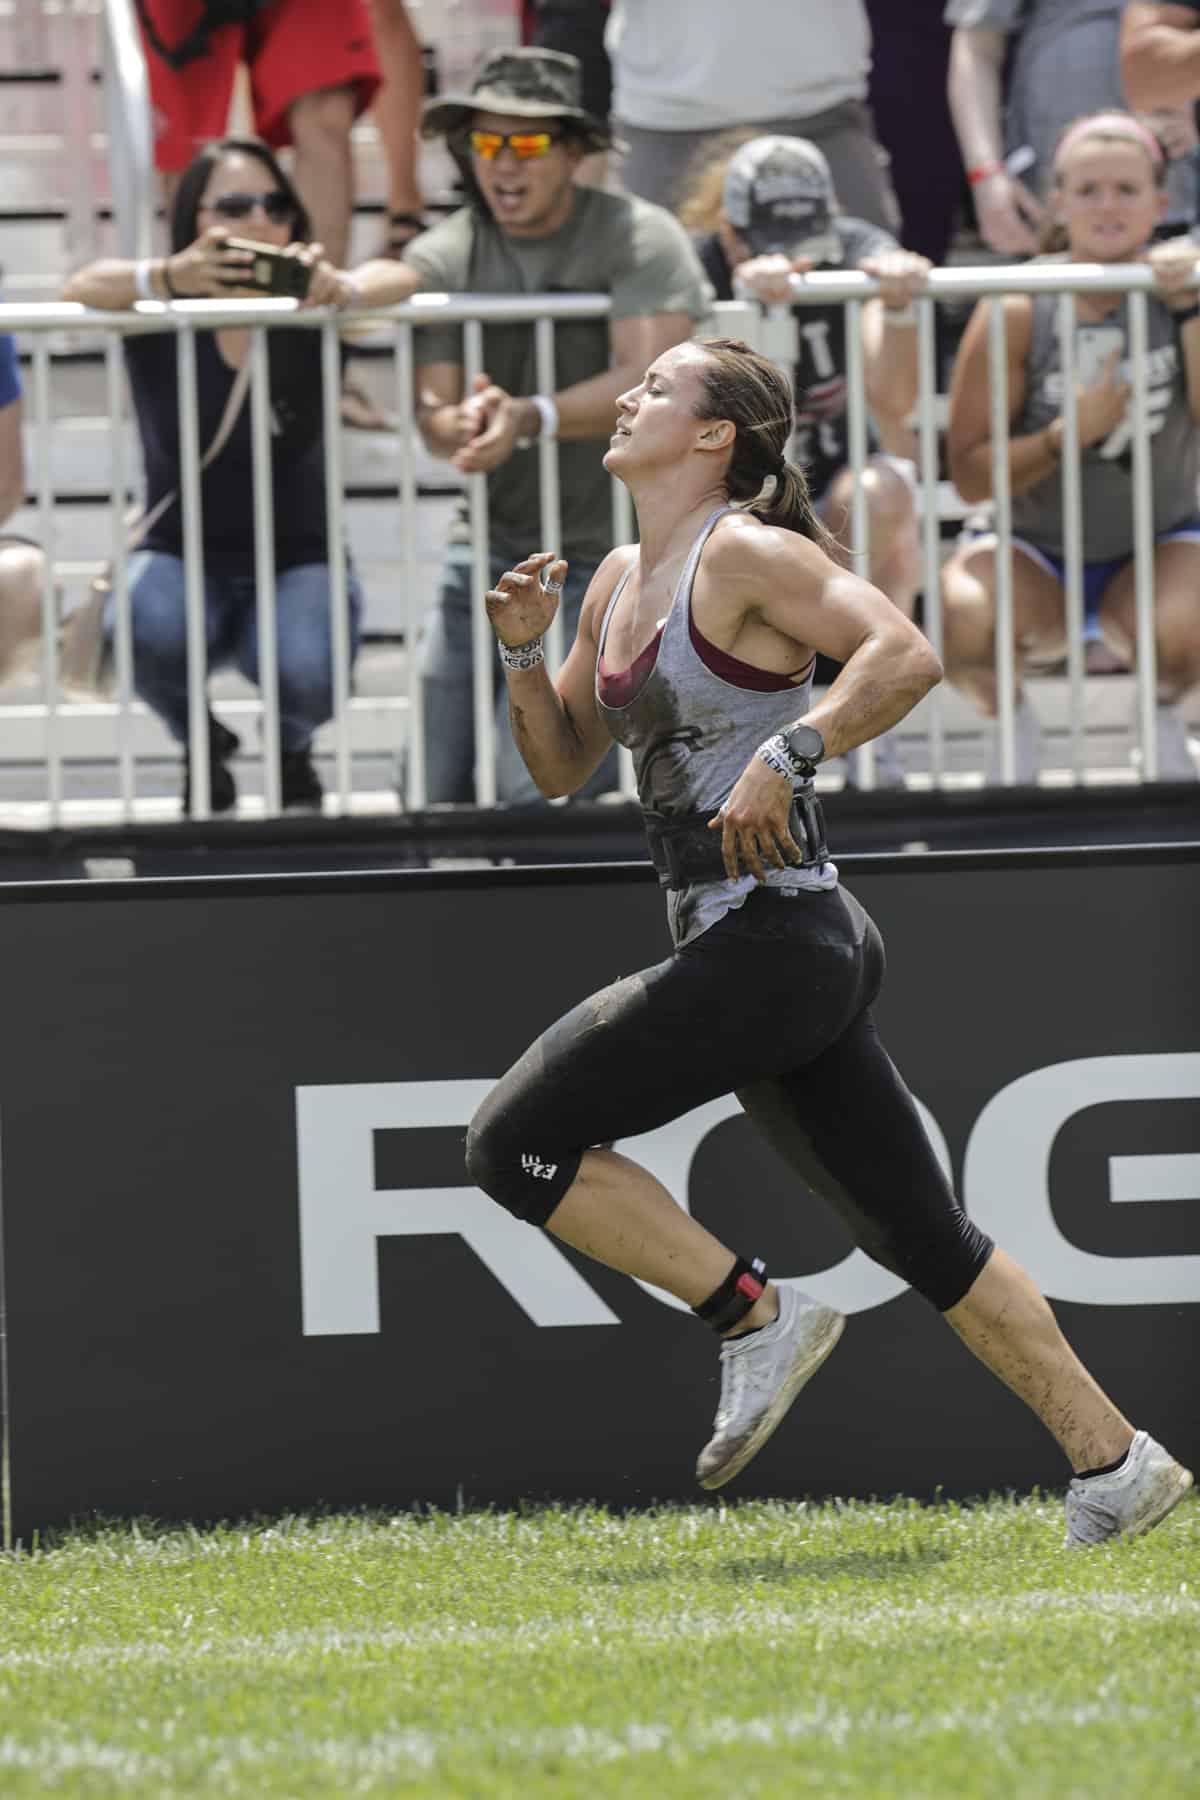 Watch the 2020 Rogue Invitational Online Fit at Midlife